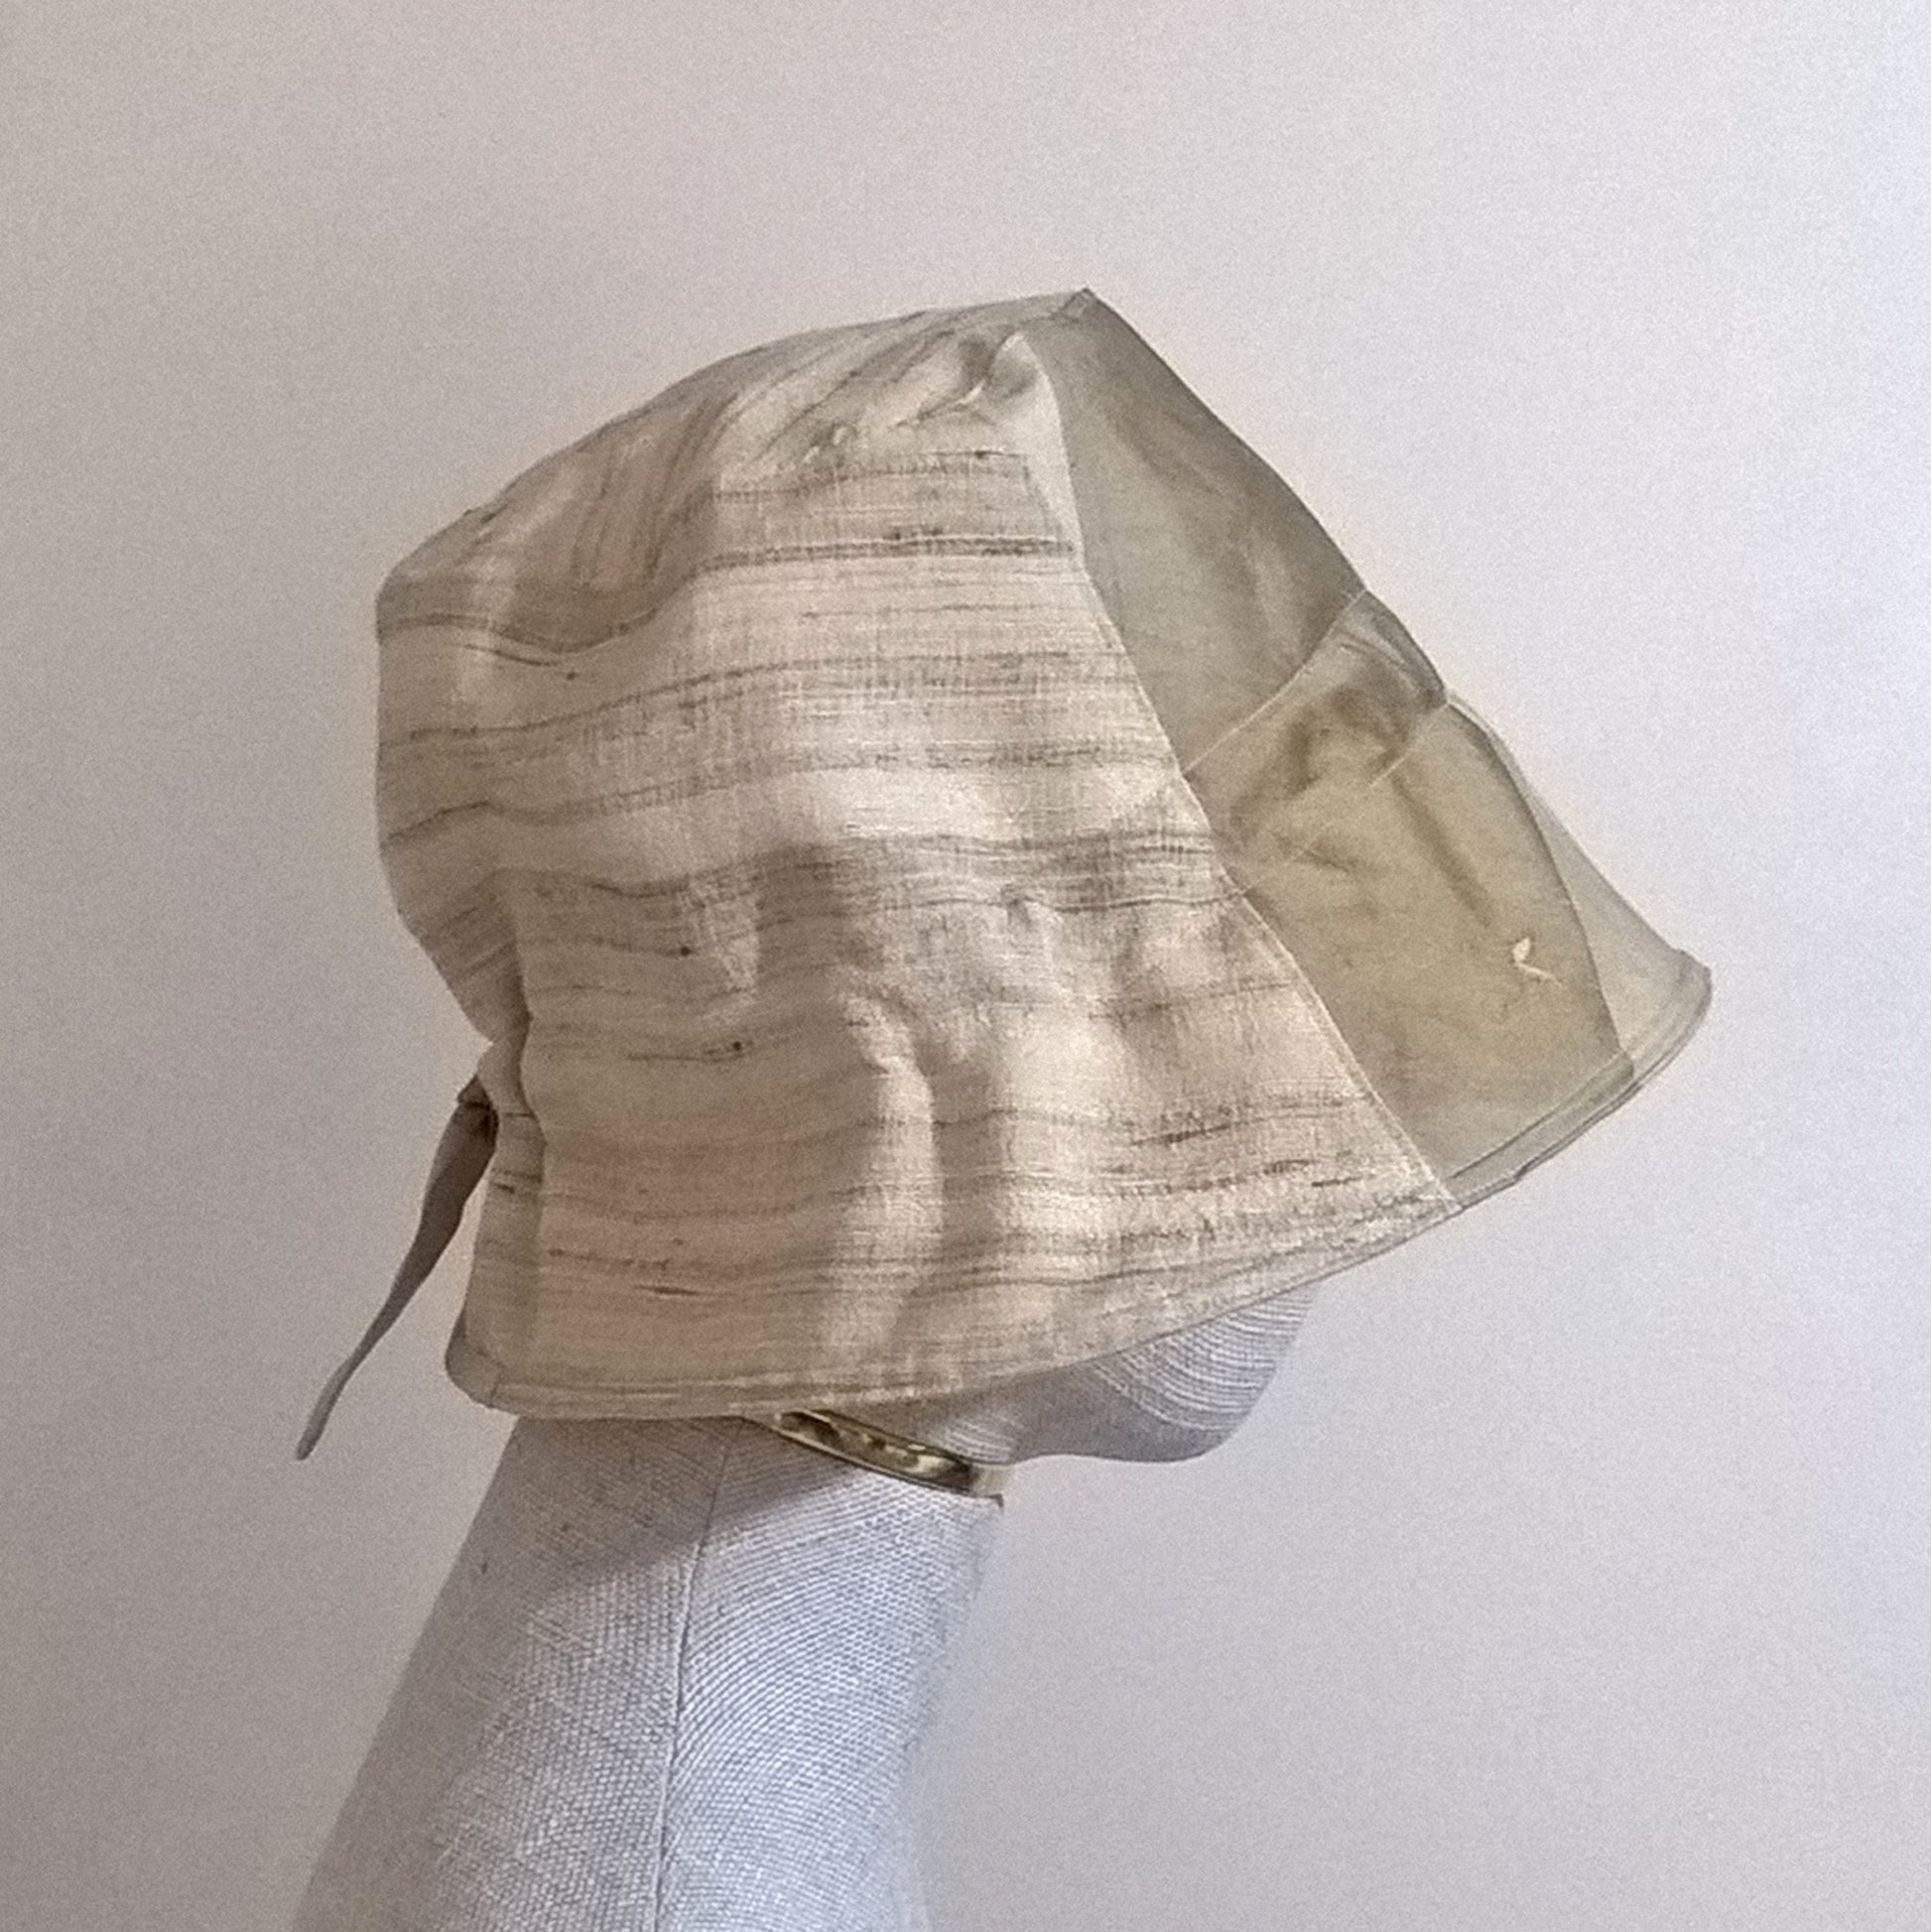 The bell shaped bucket hat has a bonnet style adjustable tie ribbon back